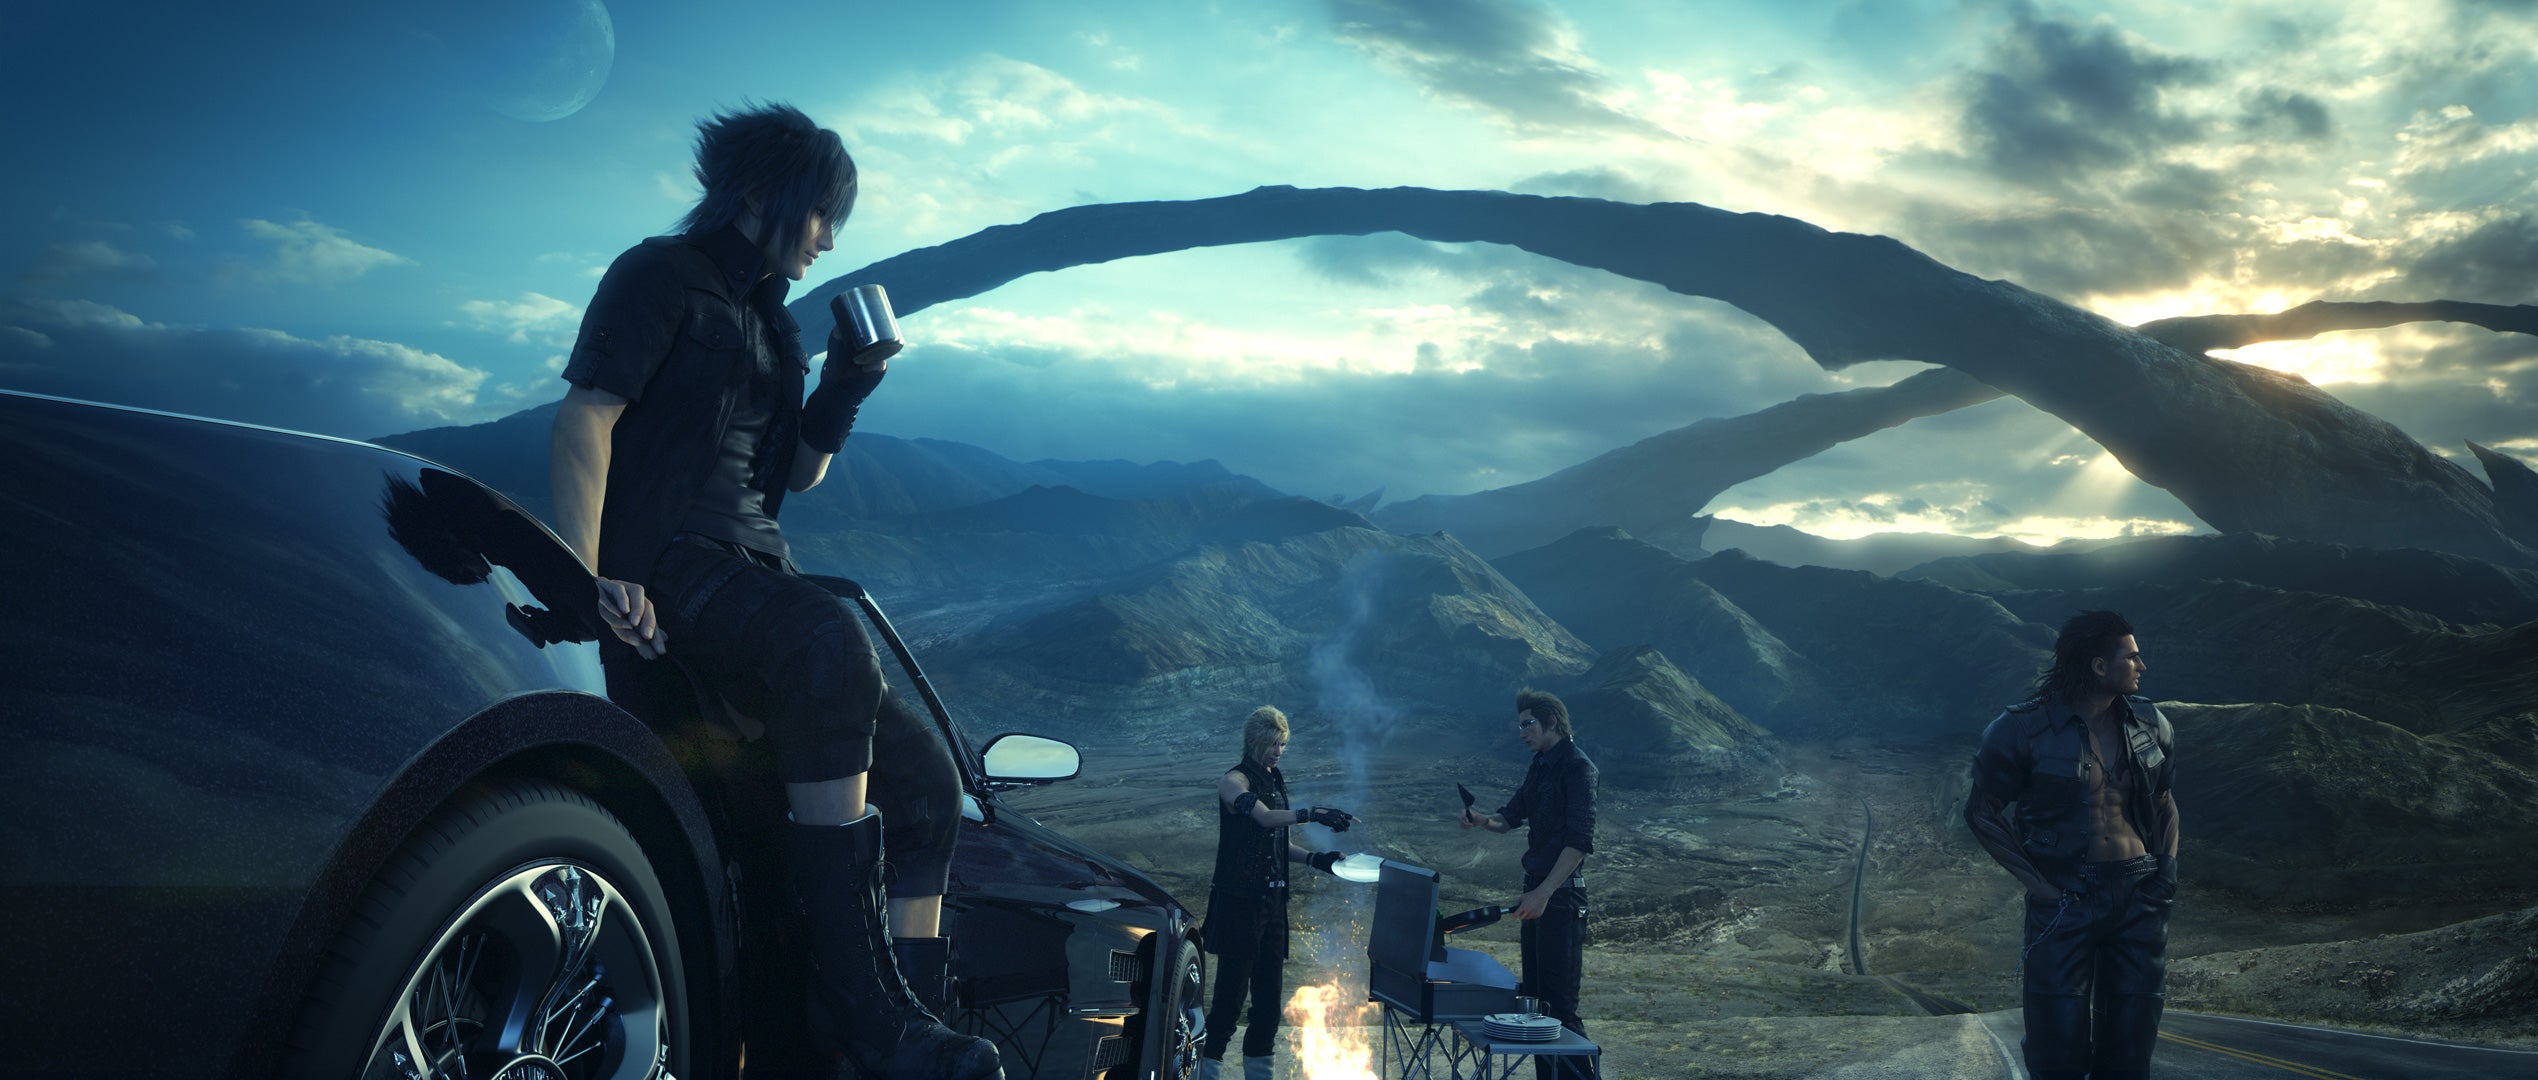 The Sword in the Waterfall – Final Fantasy XV Guide